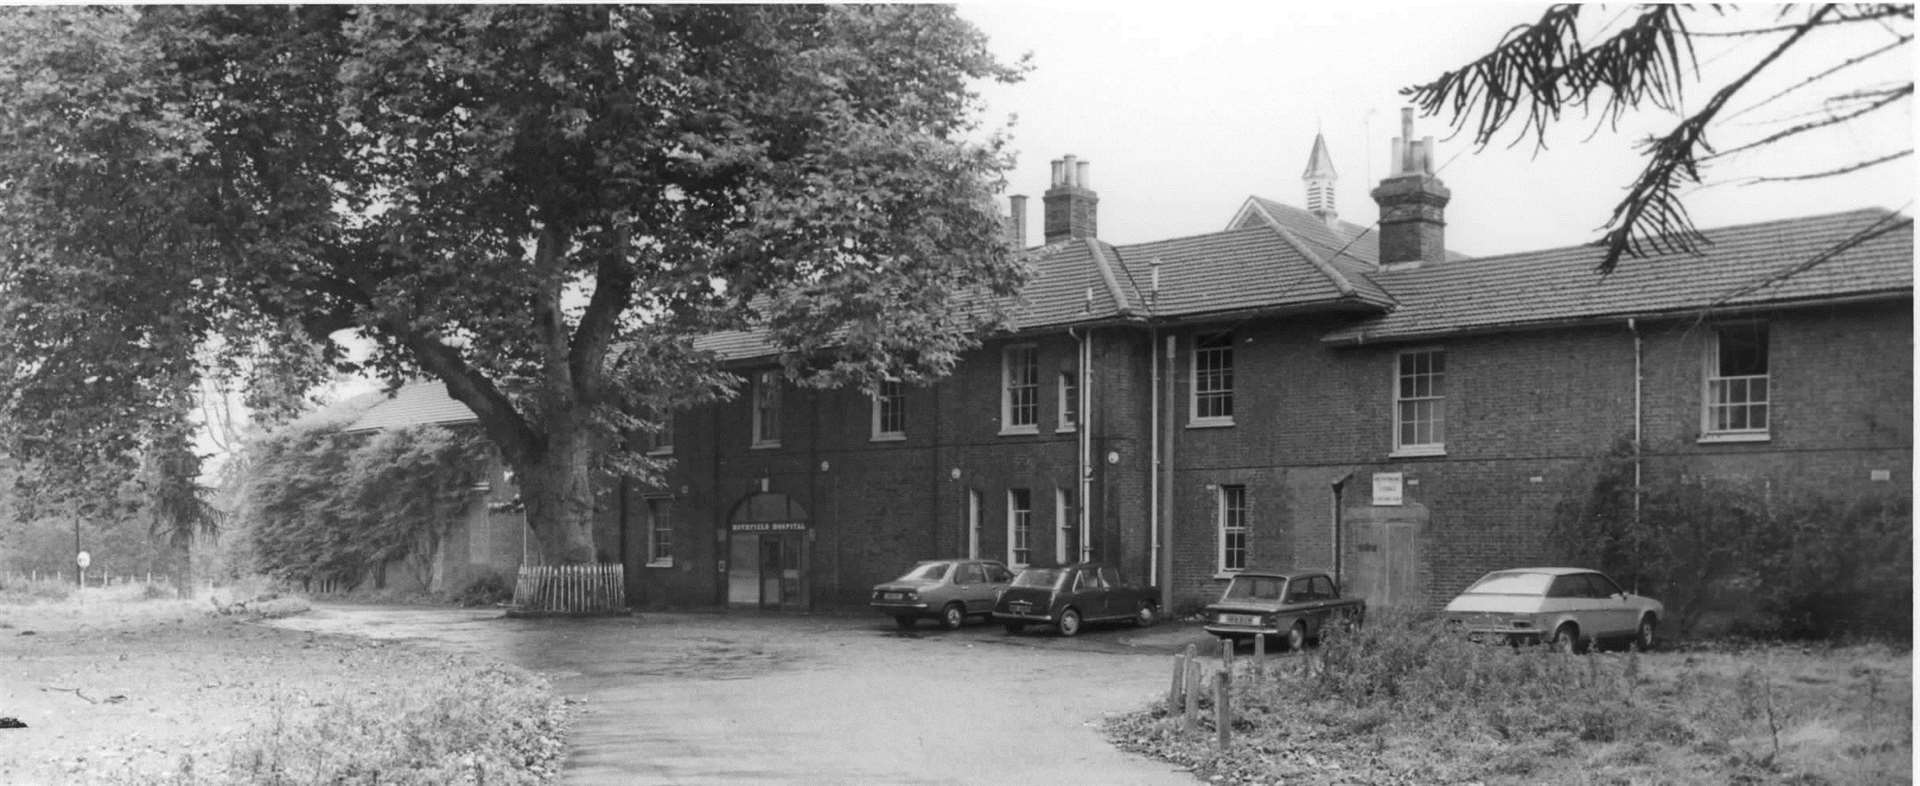 The former Hothfield Hospital between Ashford and Maidstone, in 1982, was once a workhouse